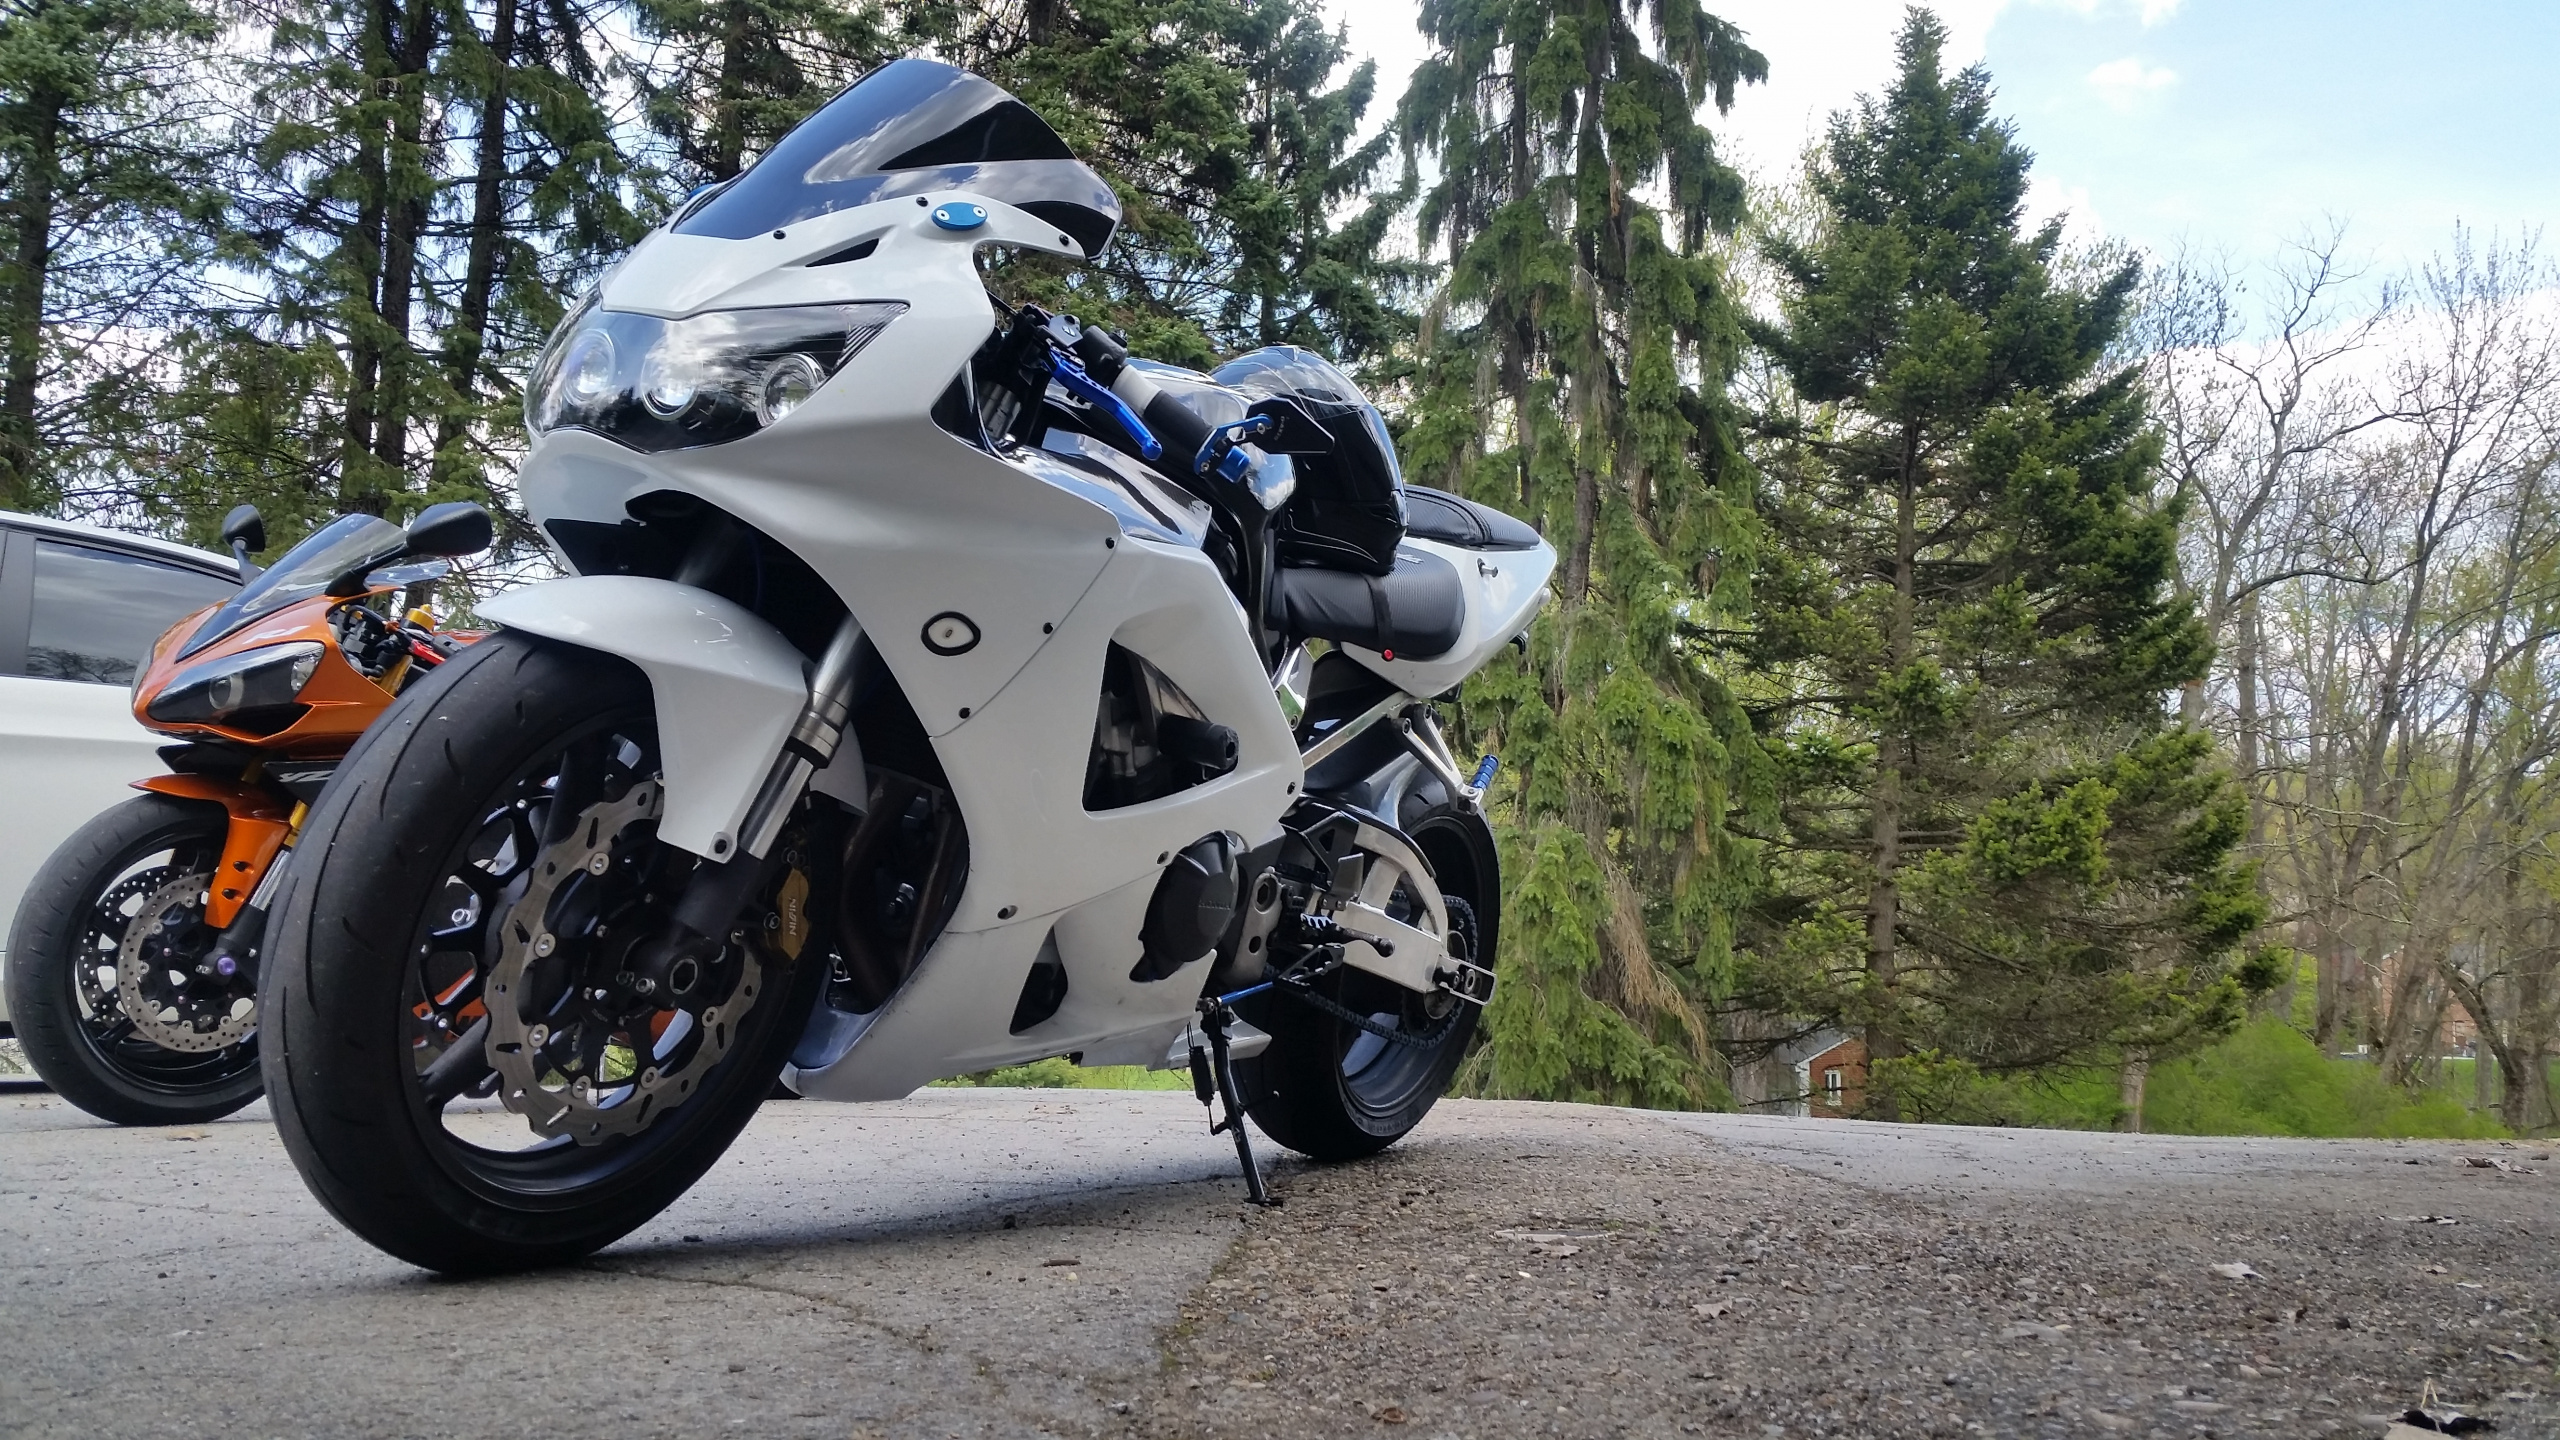 White and Black Sports Bike Parked on Dirt Road During Daytime. Wallpaper in 2560x1440 Resolution